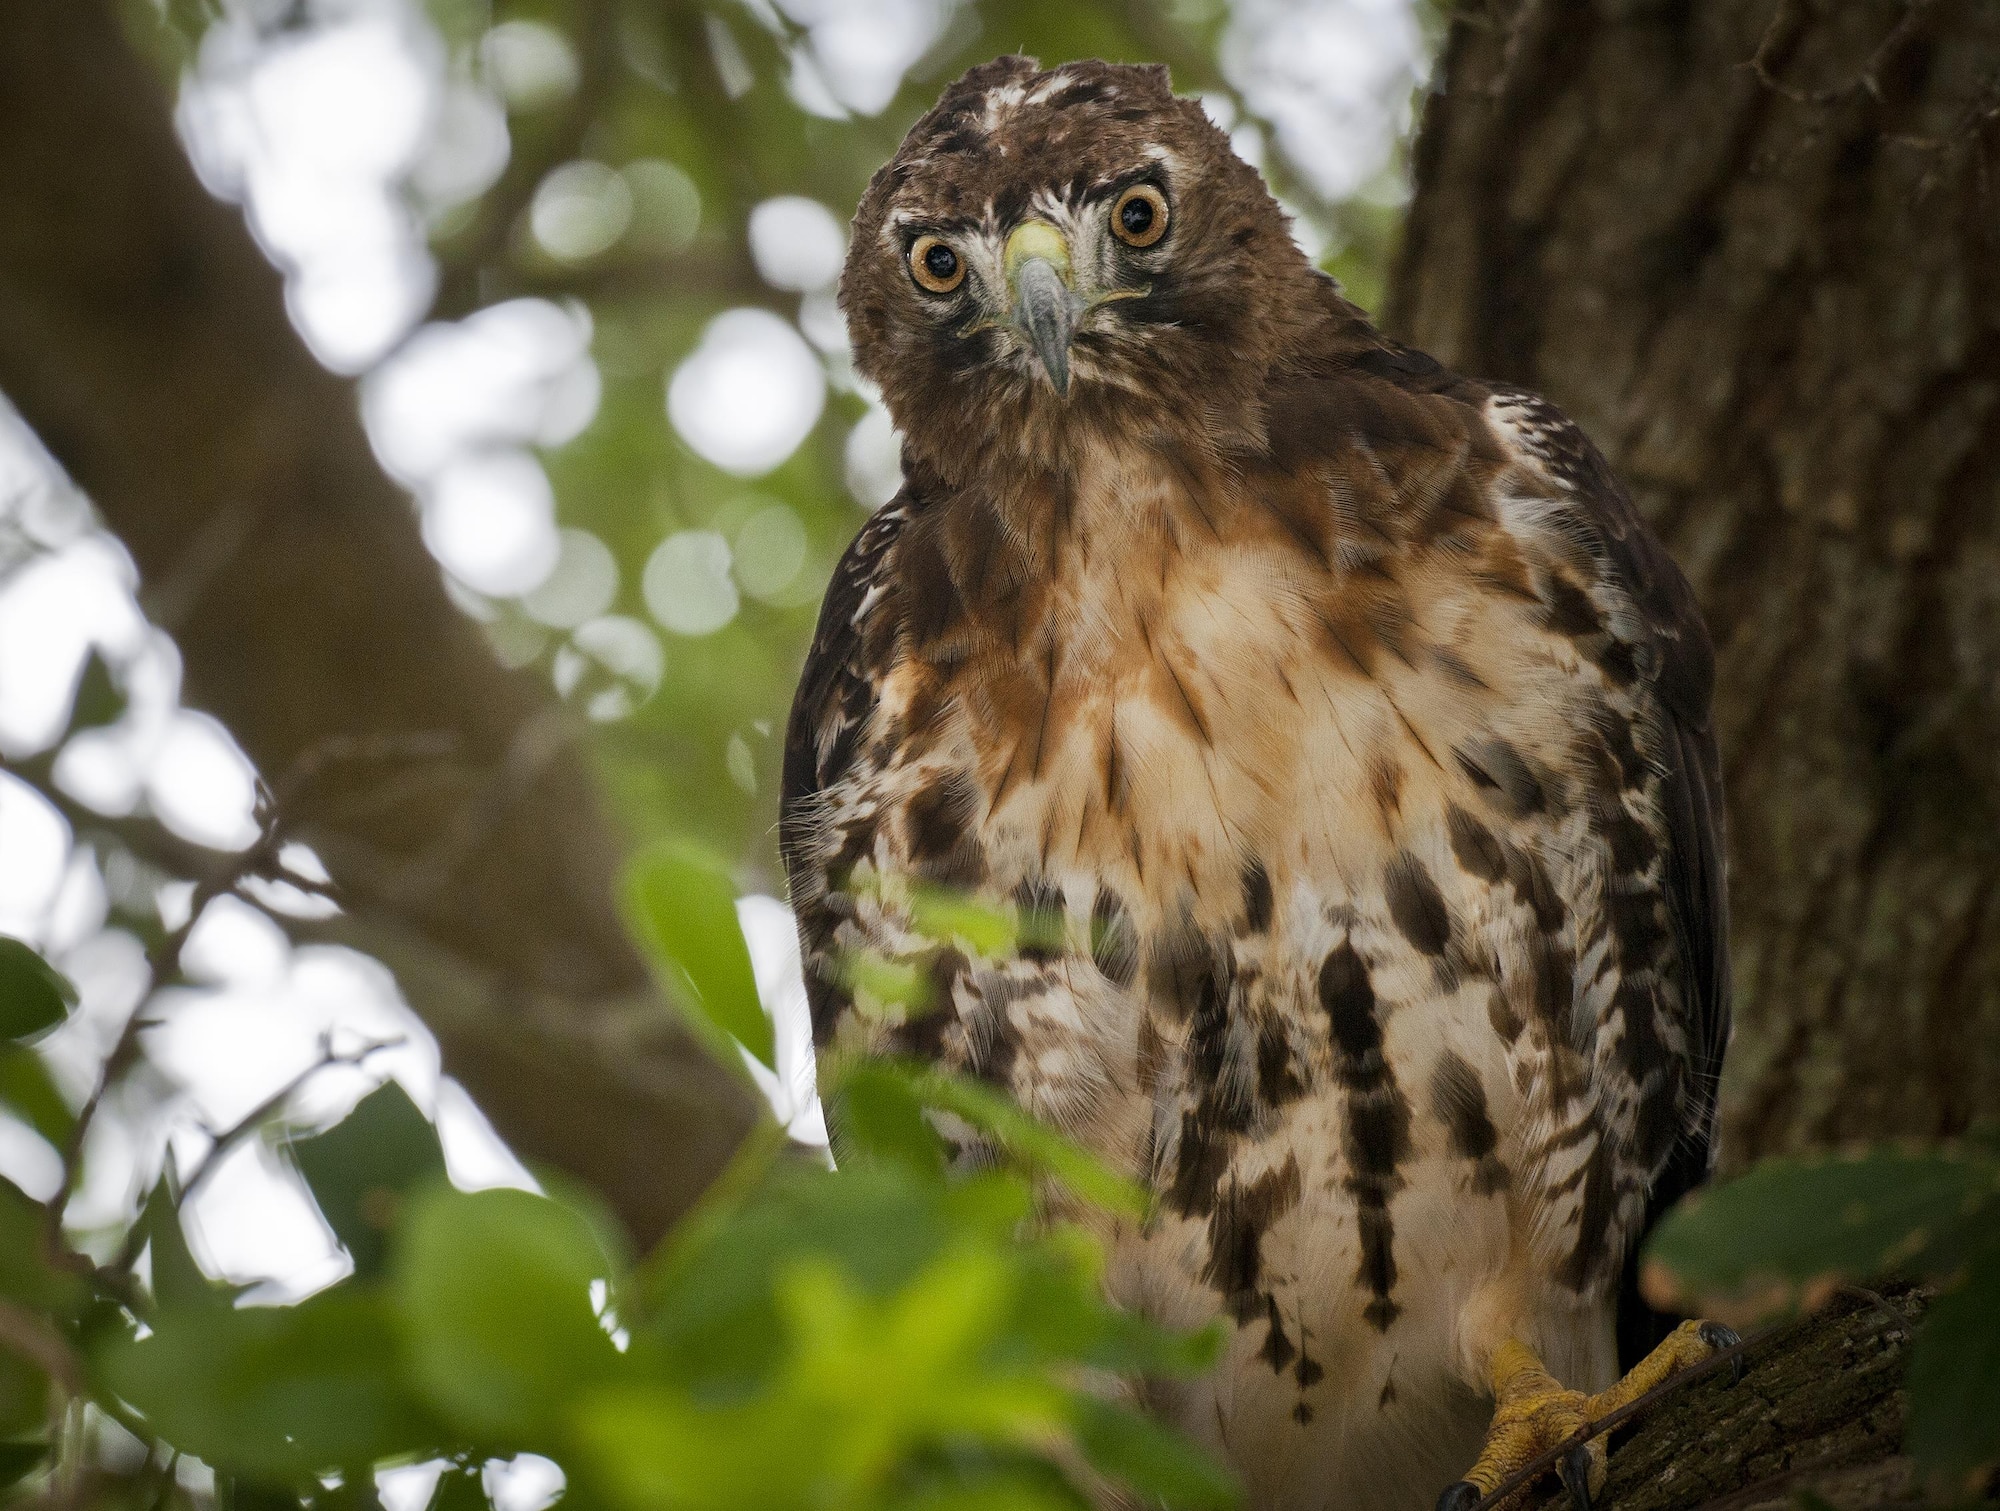 A red-tailed hawk looks out from a branch of a tree July 15 at Eglin Air Force Base, Fla.  This bird of prey is just one of many unique bird species located on the base and its outlying ranges.  (U.S. Air Force photo/Samuel King Jr.)